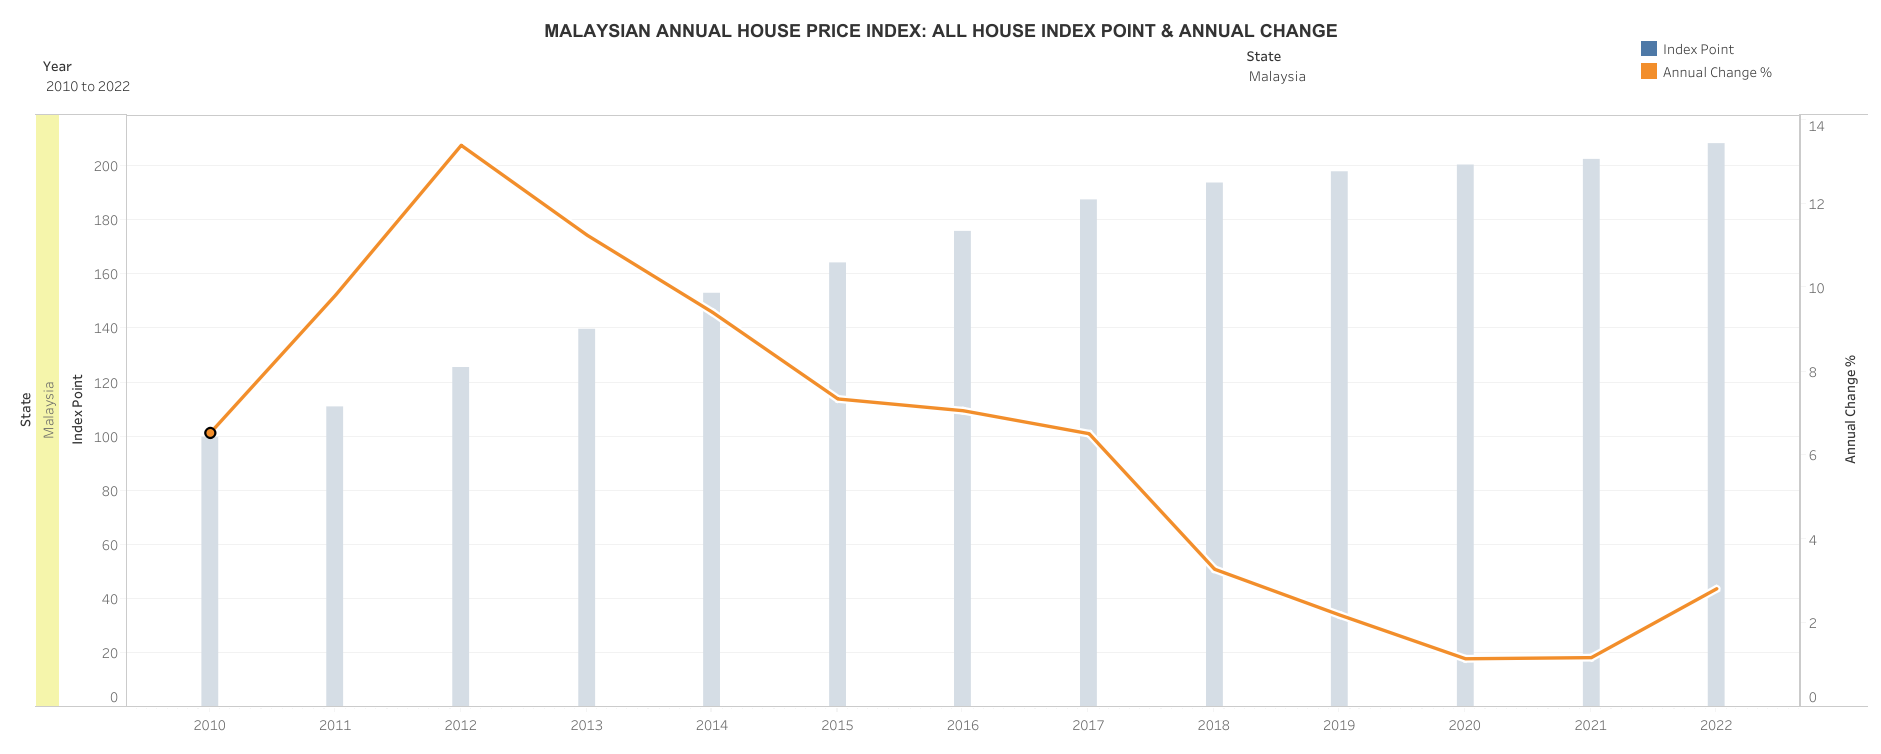 MHPI (All House Index Point & Annual Change)